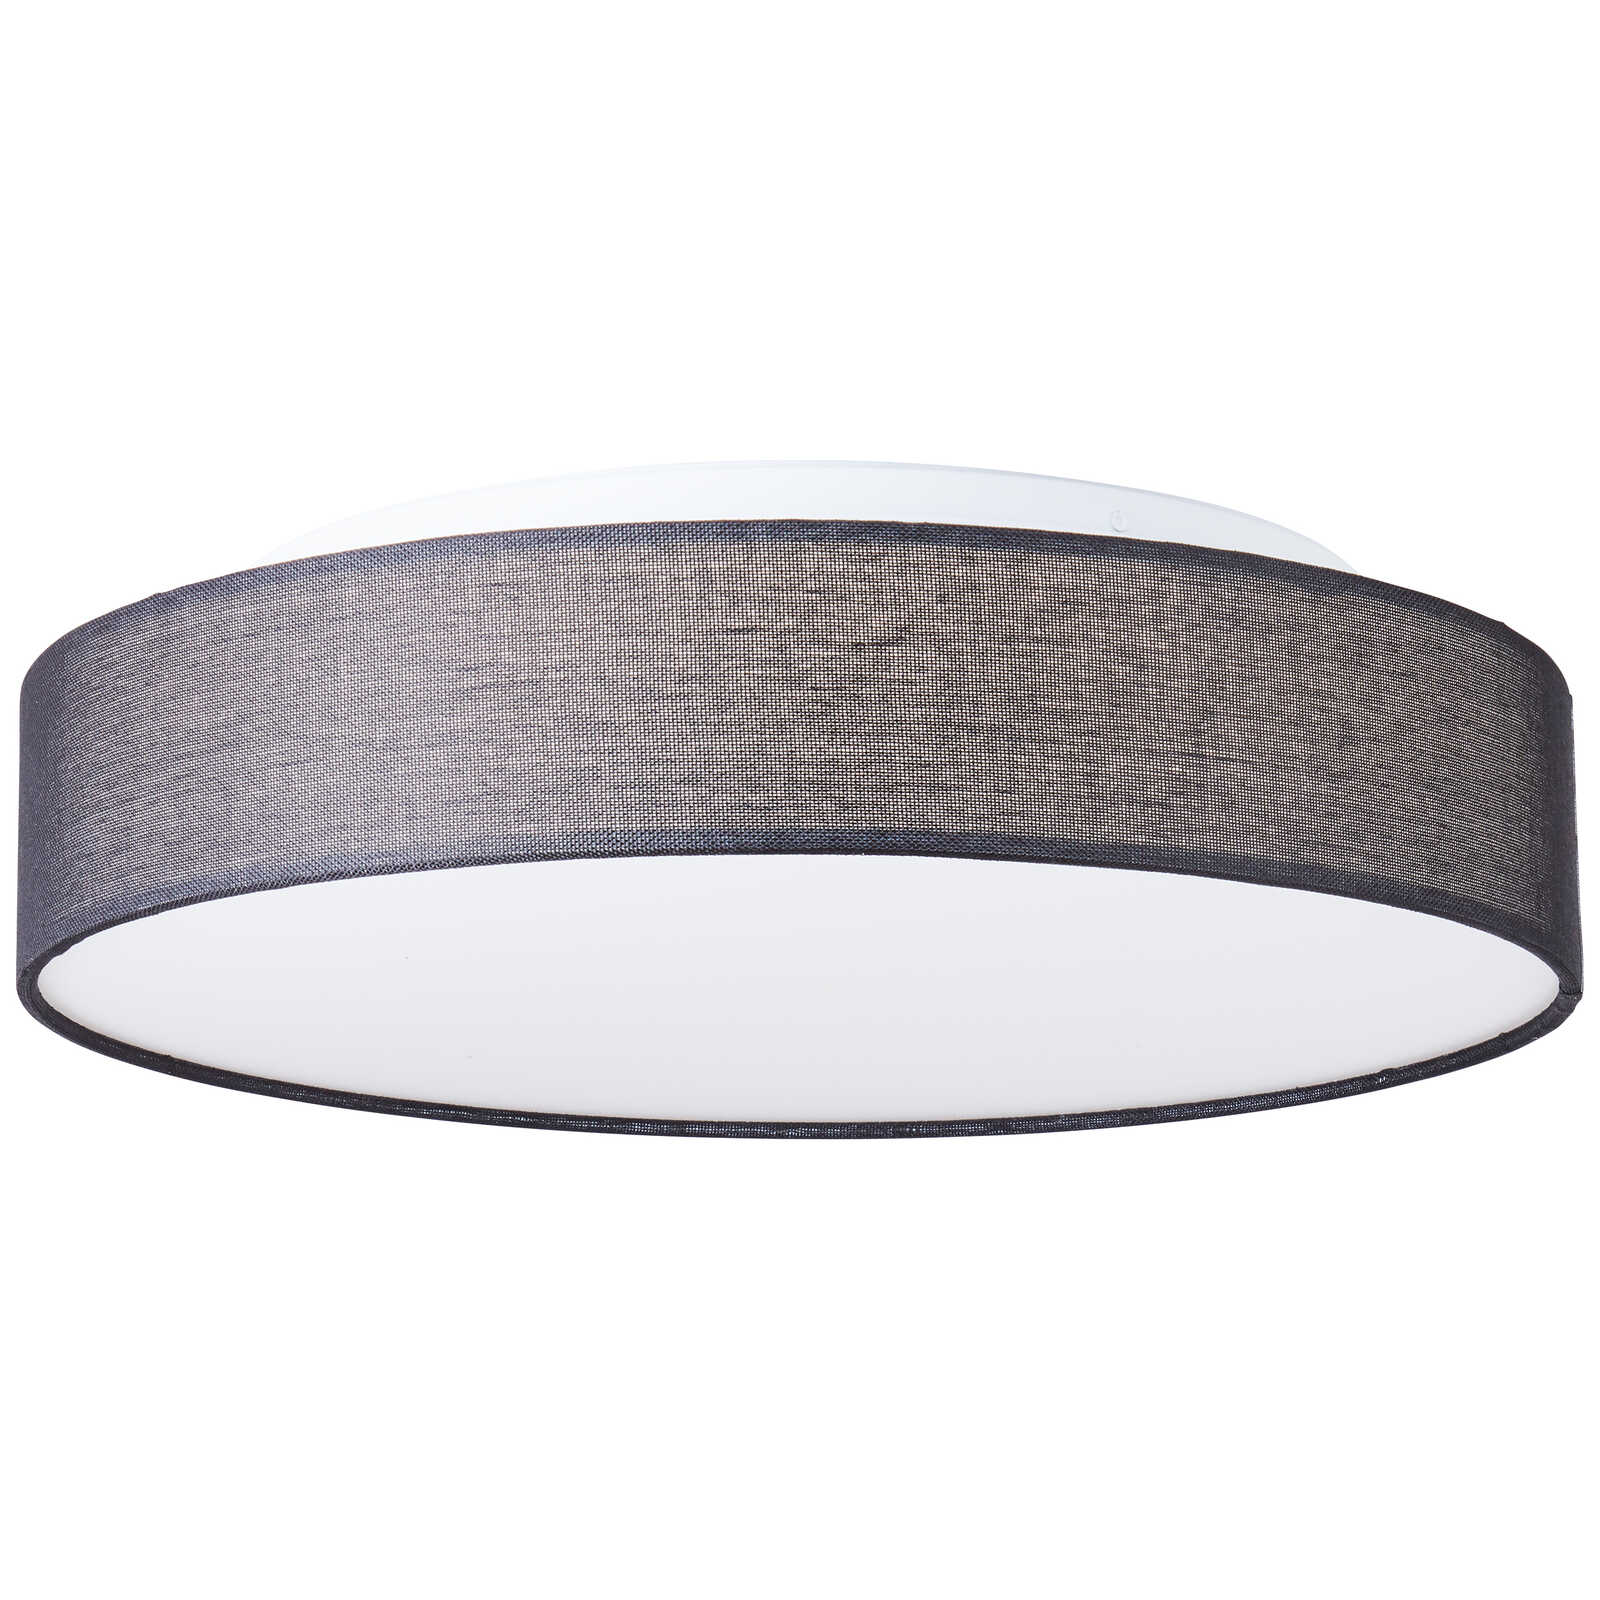             Textile wall and ceiling light - Malik - Black
        